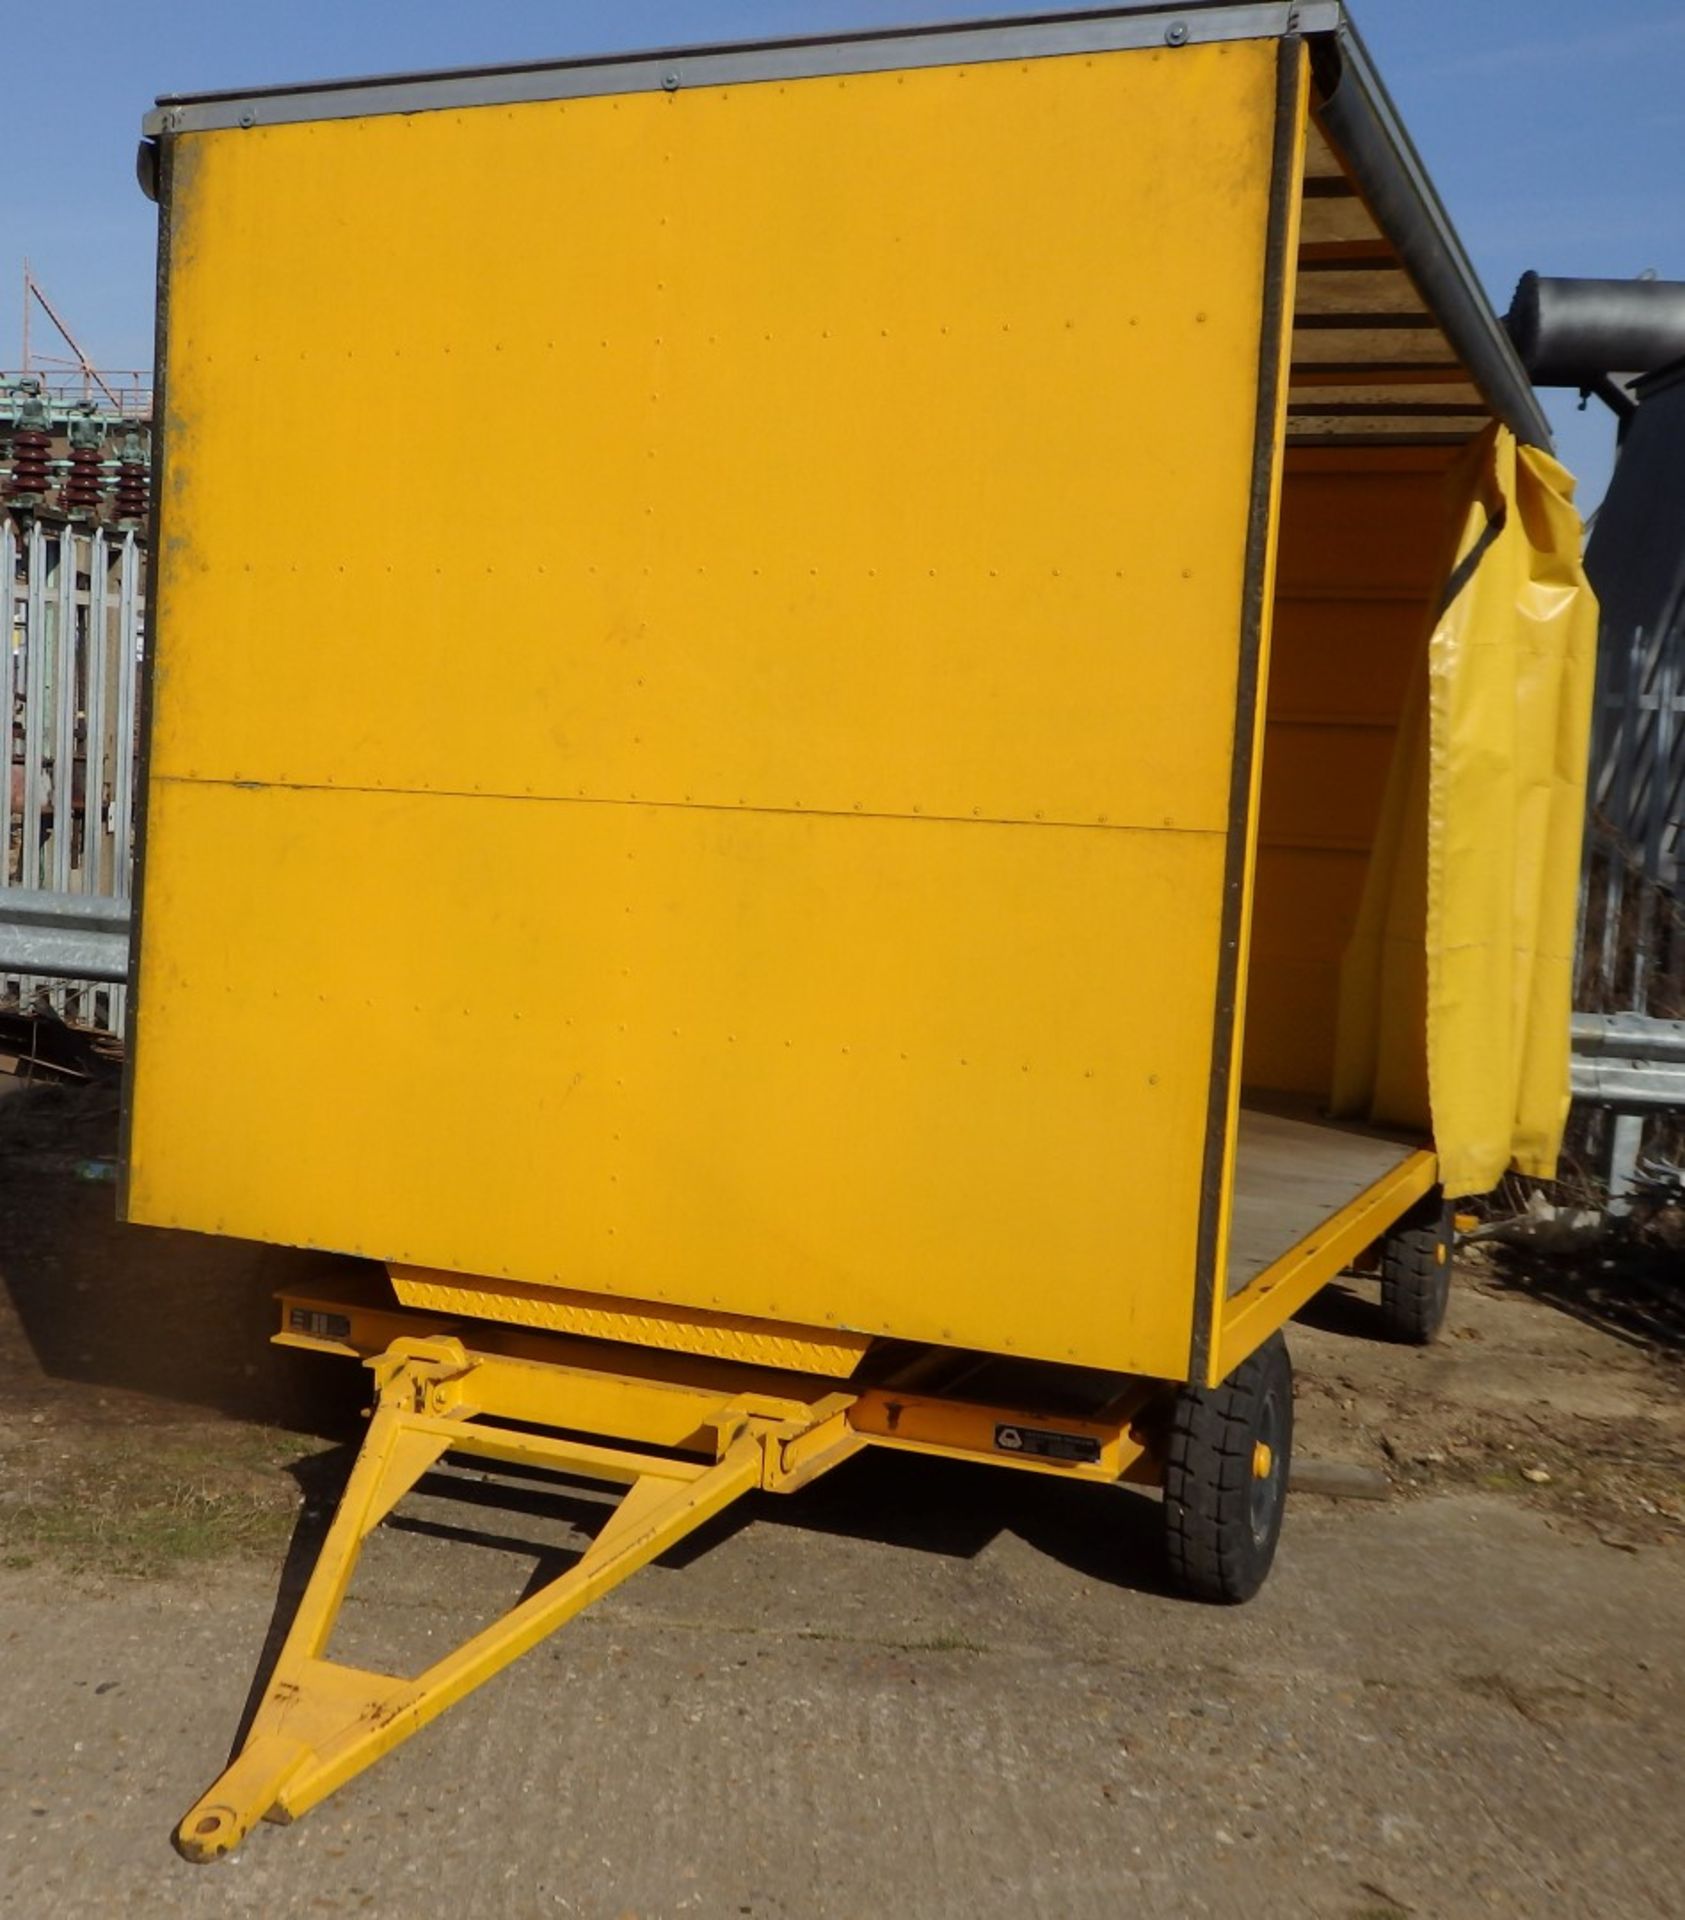 1 x Enclosed Curtain Sided Box Trailer With Turntable Steering - Alexander Trailers Model IP40ST - - Image 28 of 28